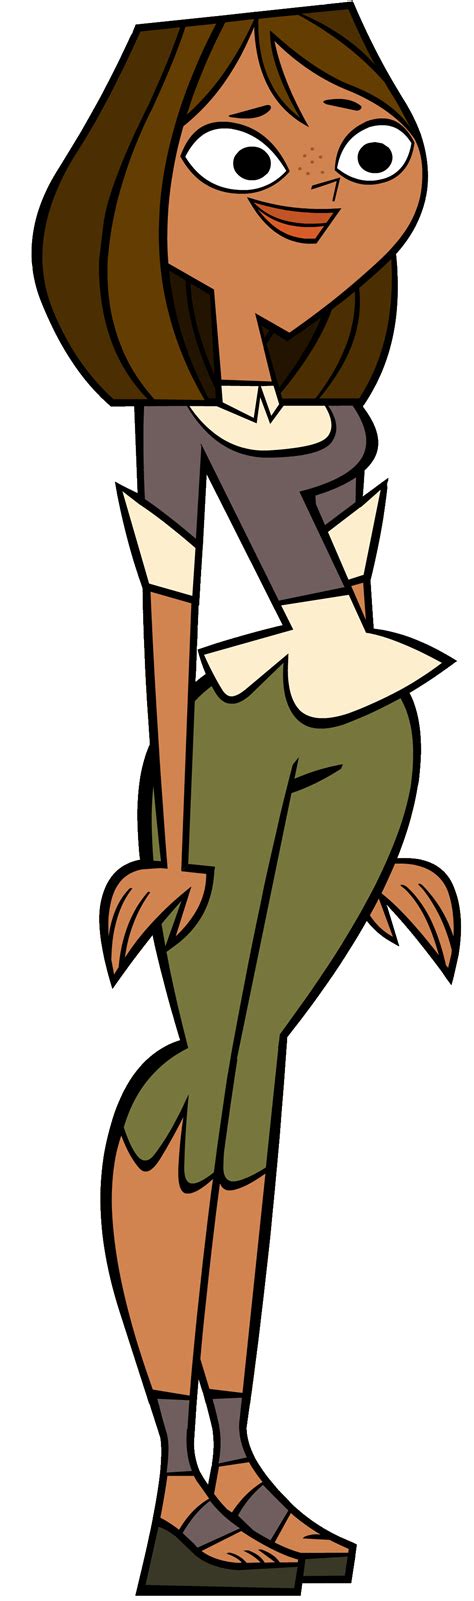 Characters in Total Drama Oskayi Island. Total Drama Oskayi Island Wikia. Explore. Main Page; Discuss; All Pages; Community; Interactive Maps; Recent Blog Posts; Wiki Content. Recently Changed Pages. Nicole; Natalie; ... Total Drama Oskayi Island Wikia is a FANDOM TV Community.. 